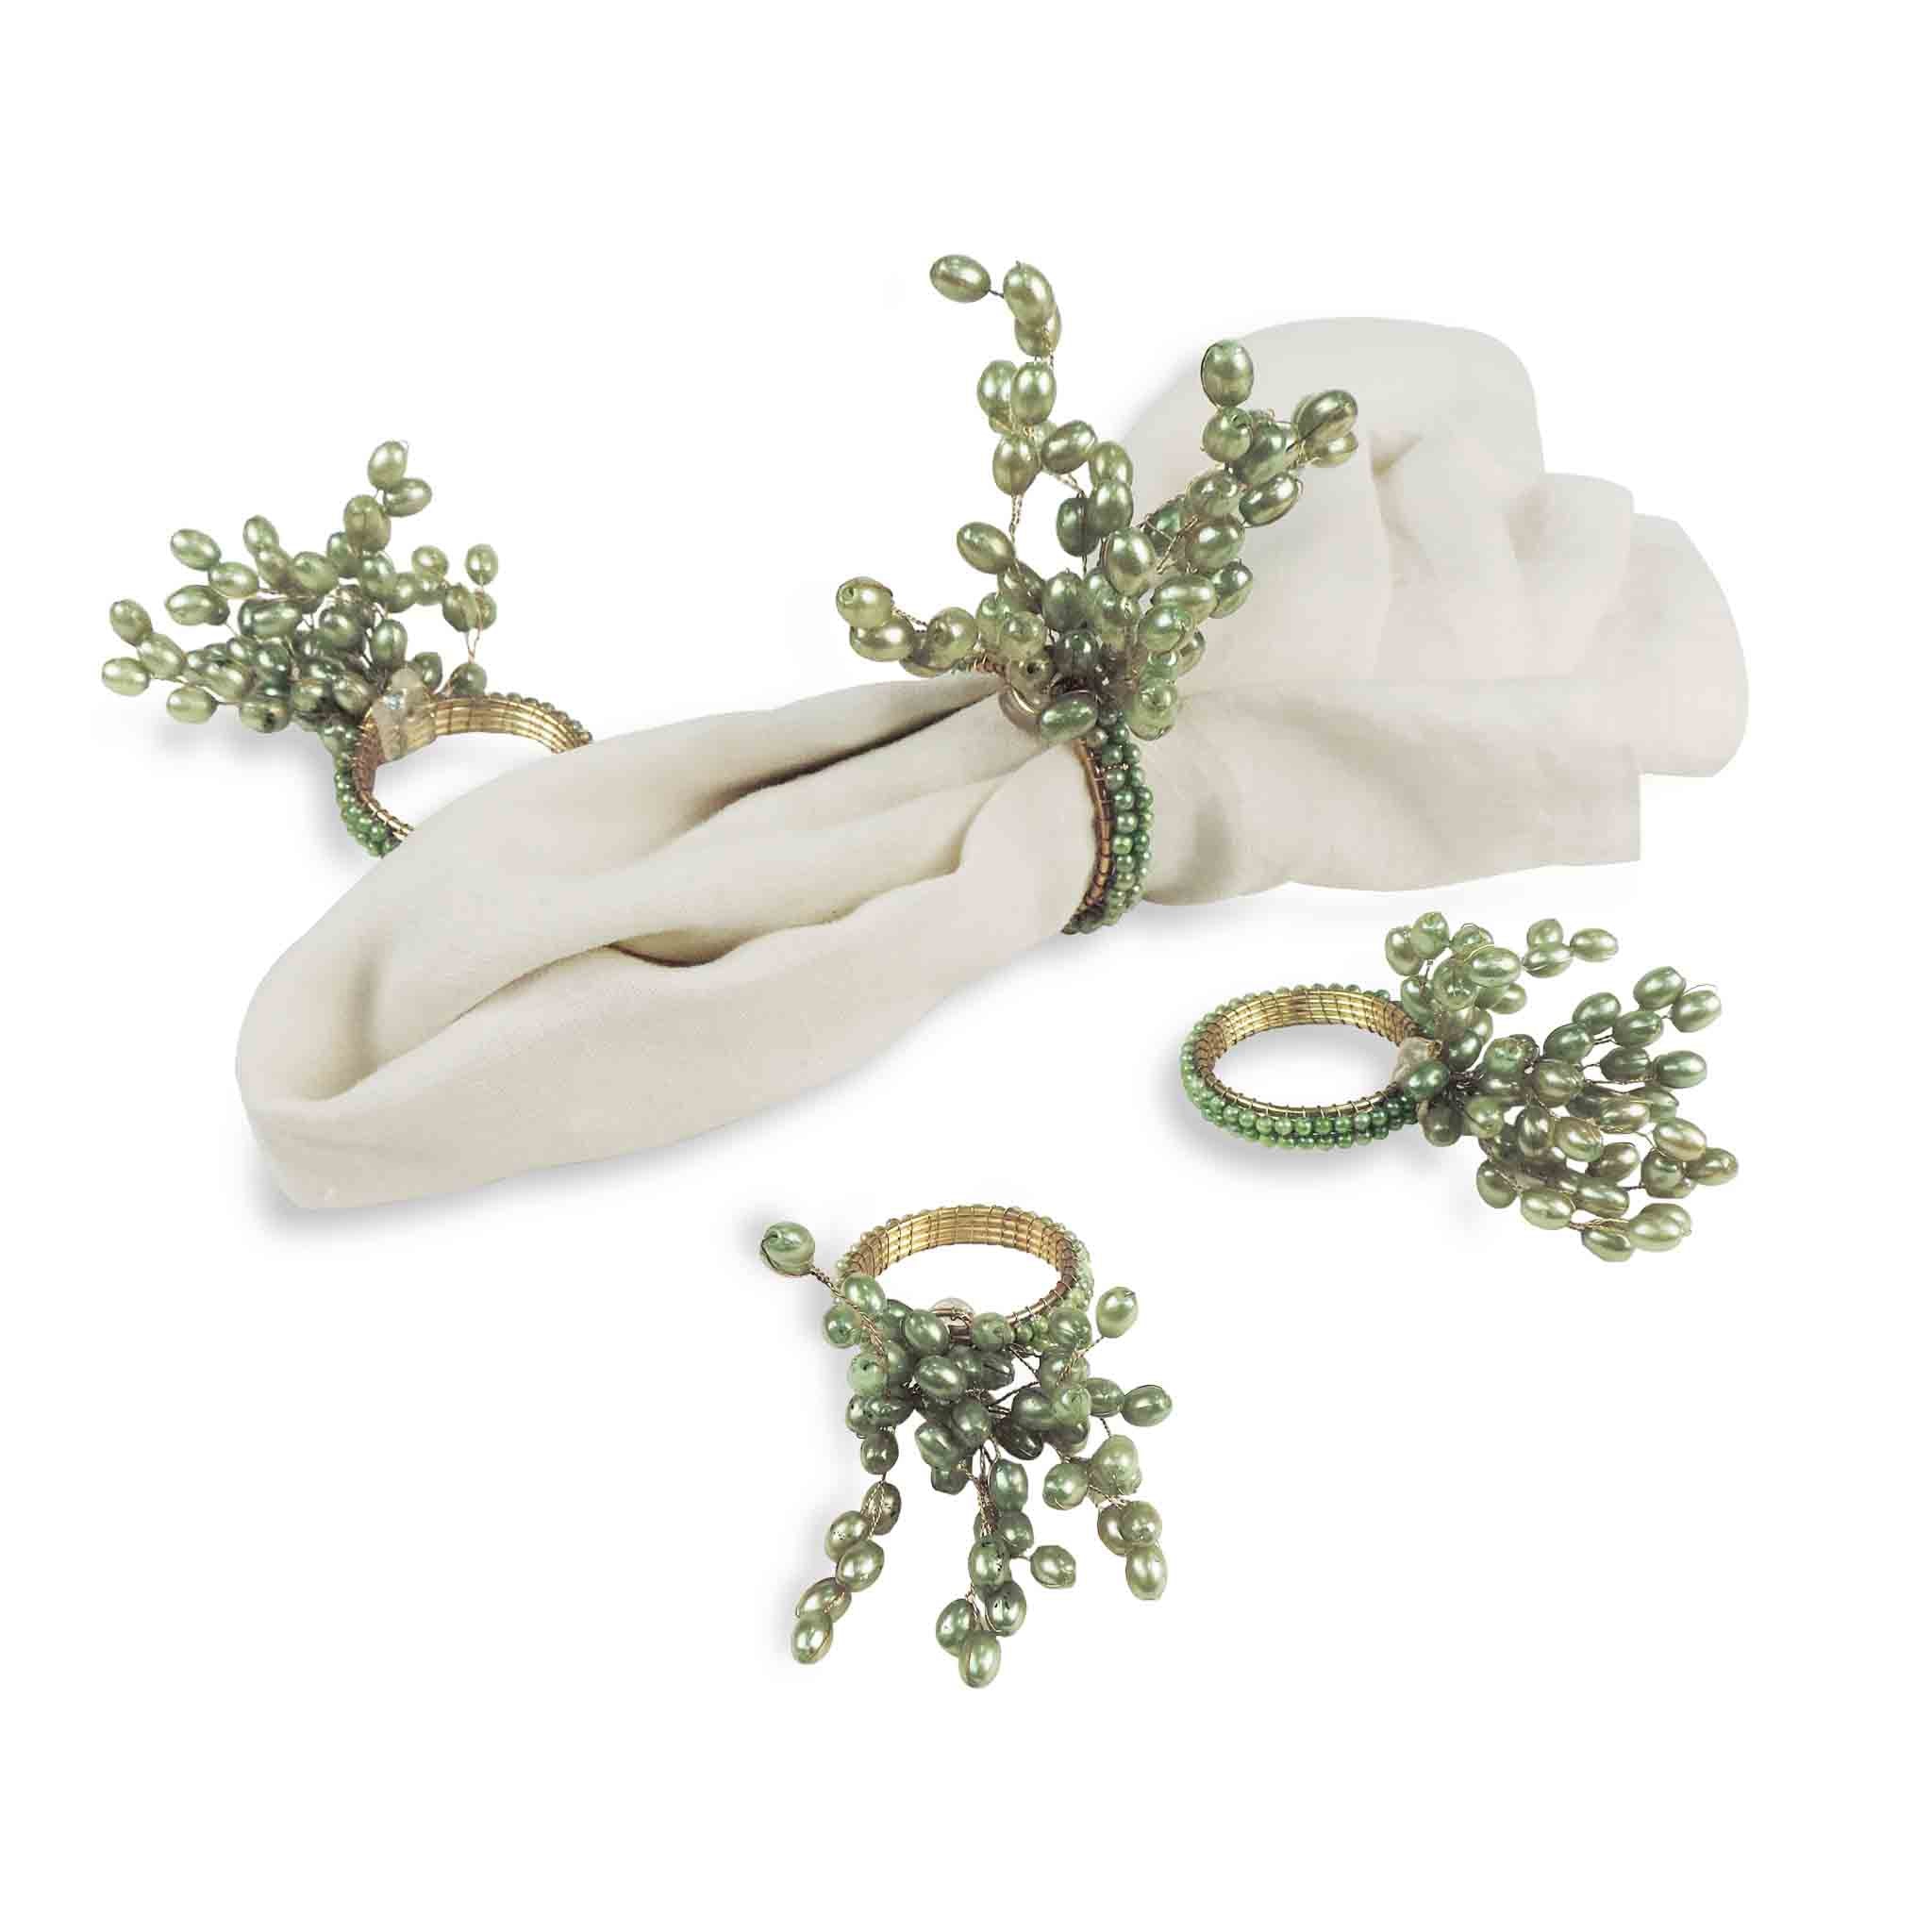 Willow Bud Napkin Ring in Green, Set of 4